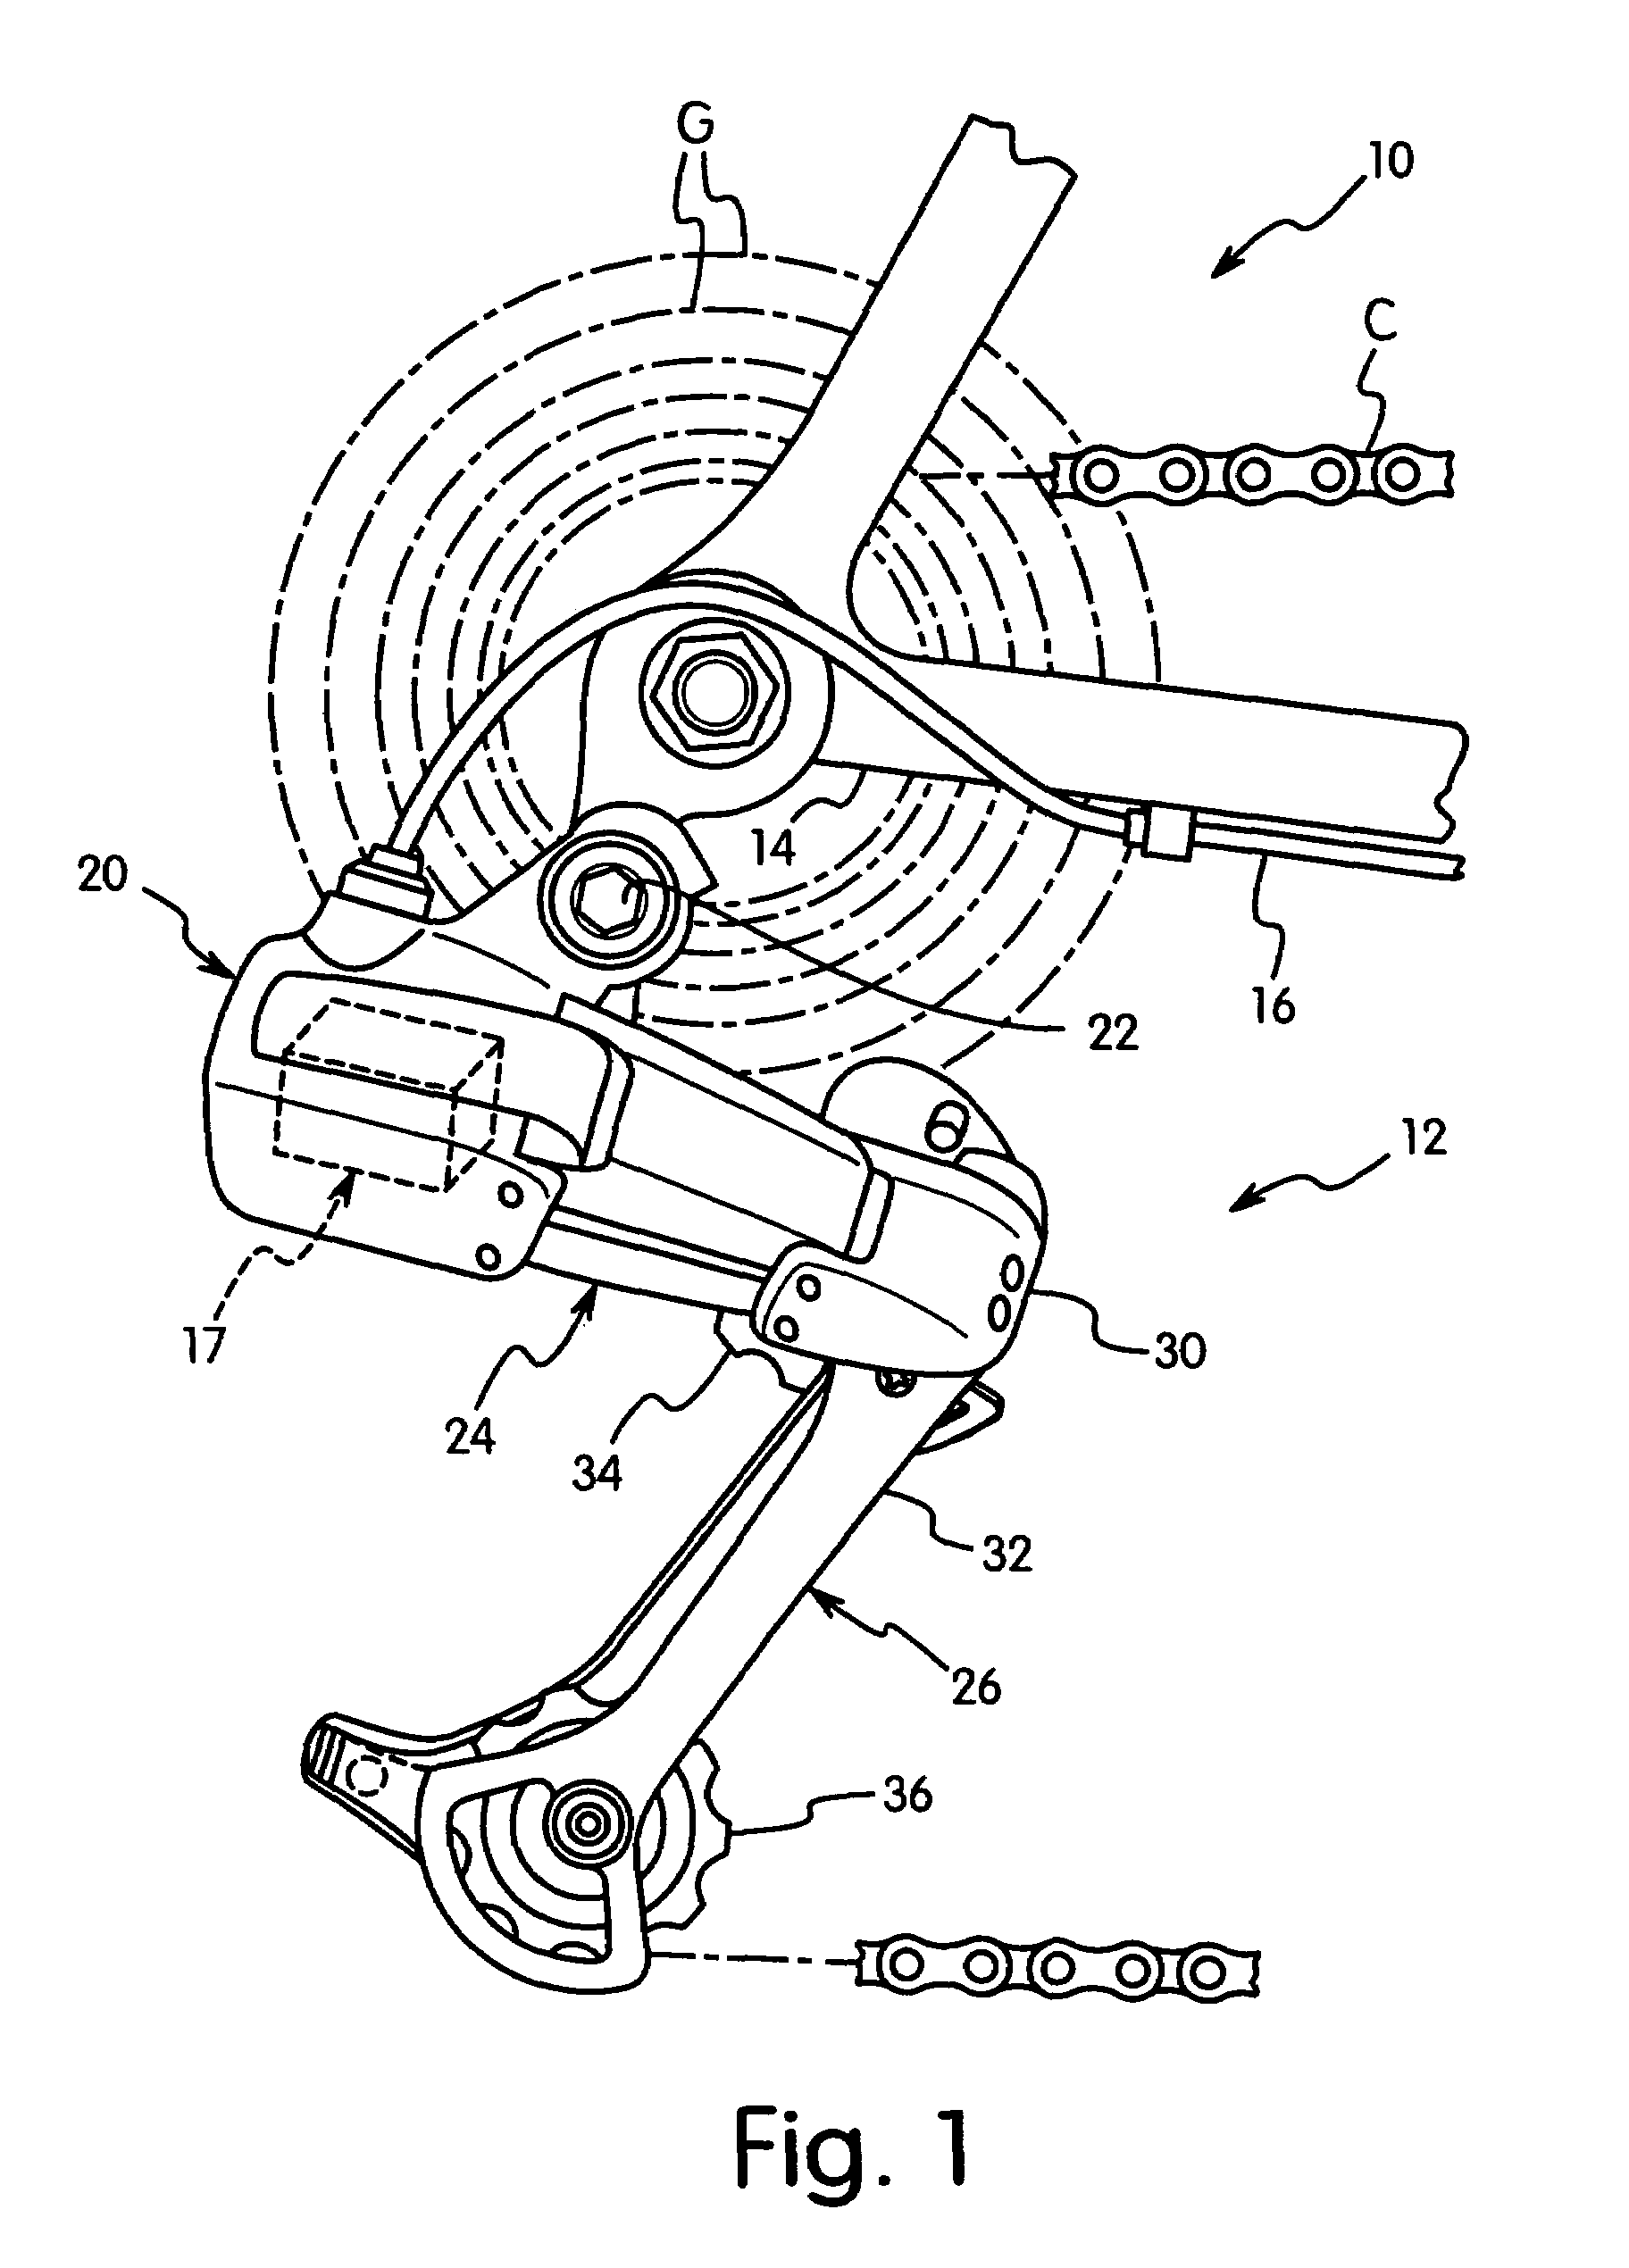 Bicycle component with axle fixing structure